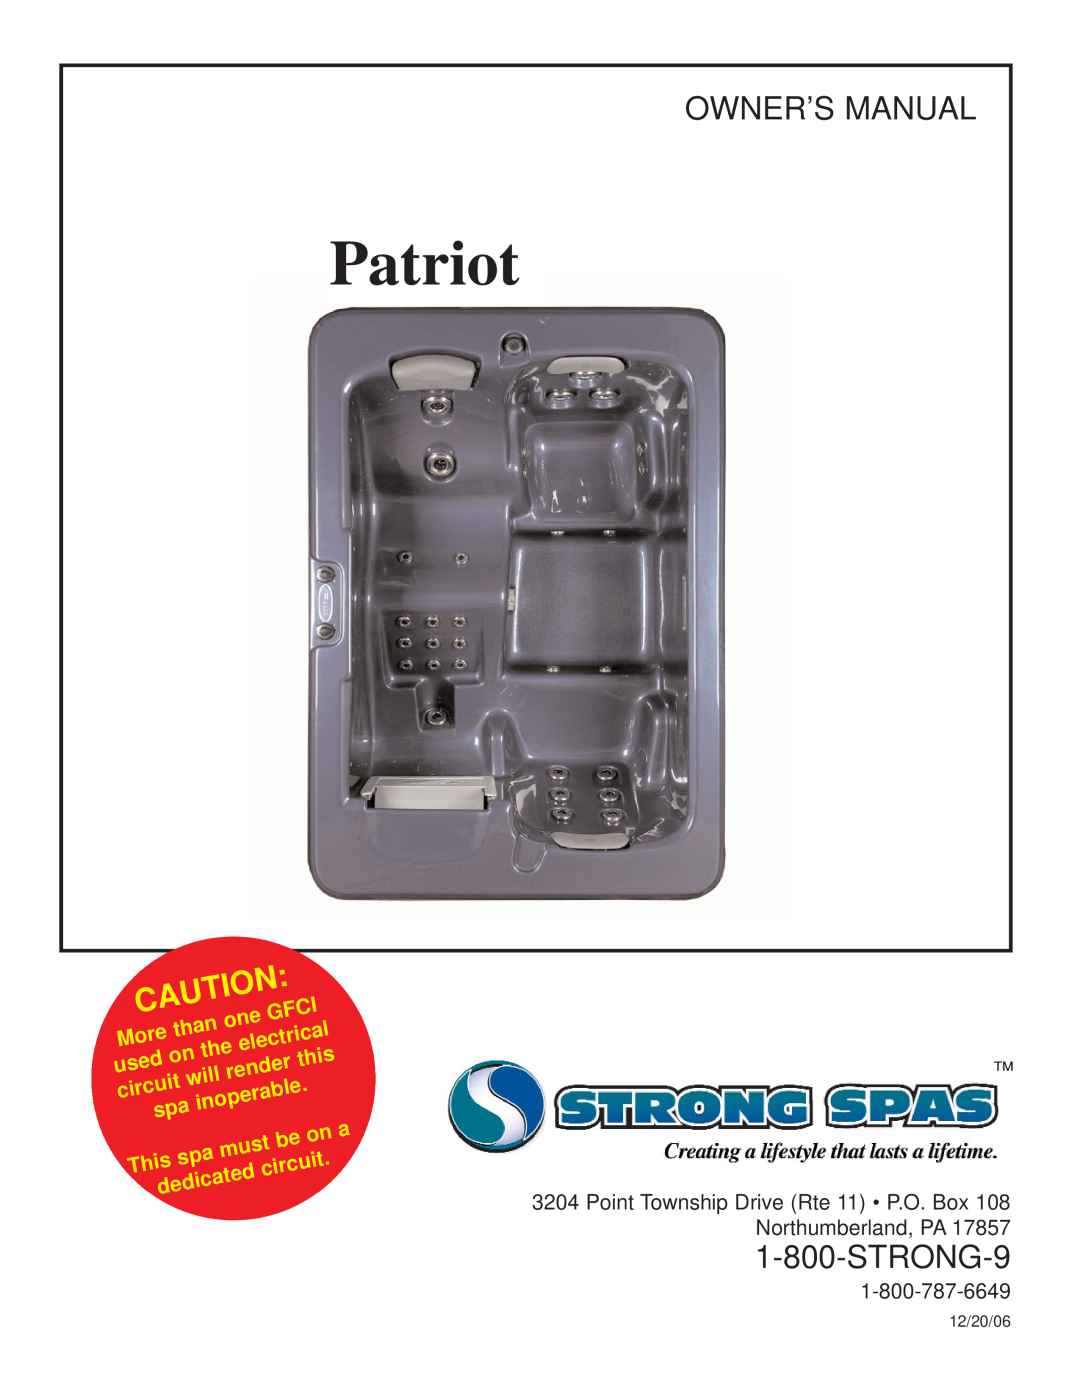 Strong Pools and Spas Patriot Spa owner manual than, Gfci, More, electrical, used, this, render, will, circuit, inoperable 